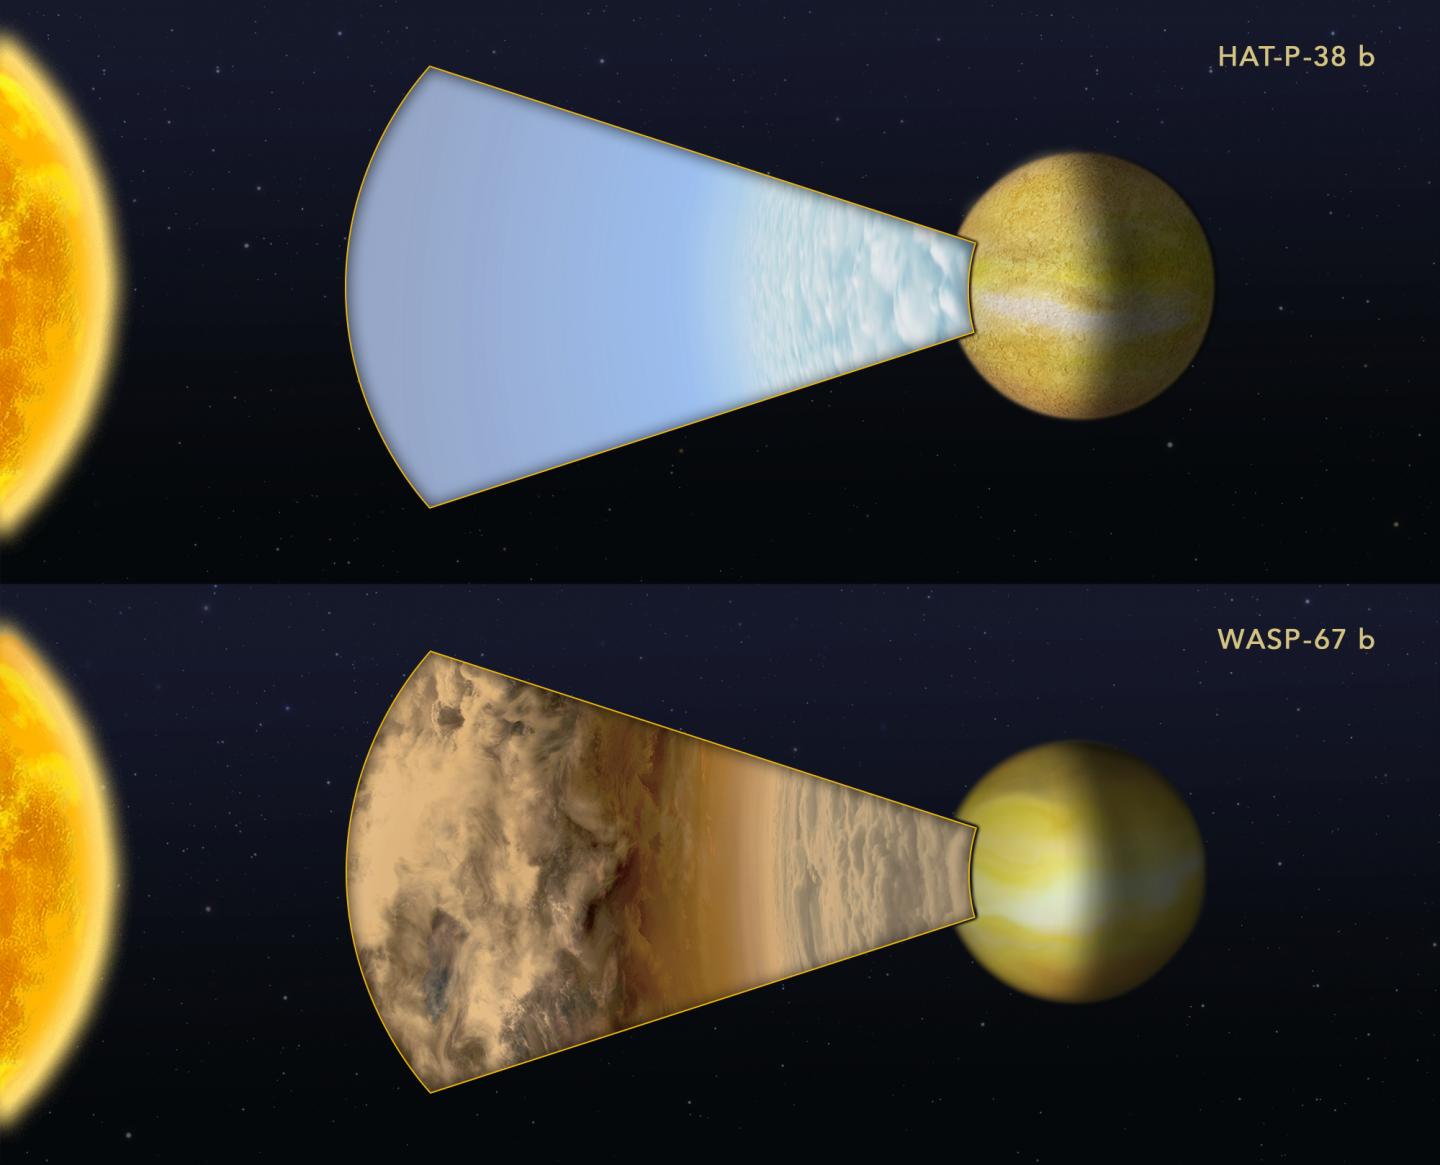 A Take of two Exoplanets